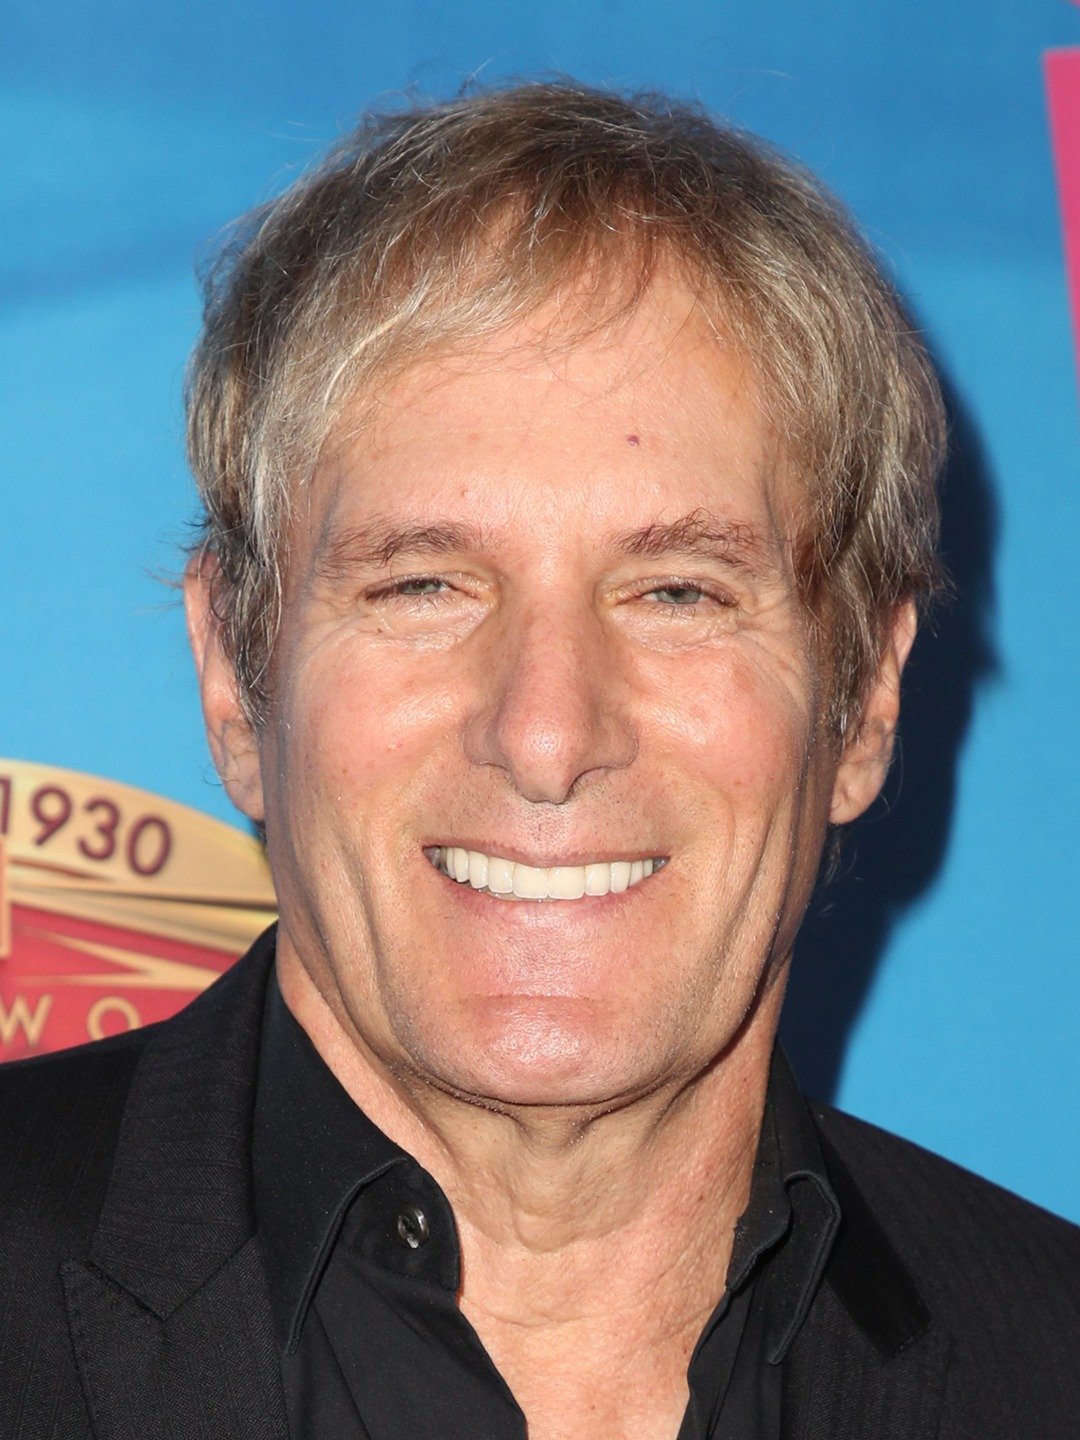 How tall is Michael Bolton?